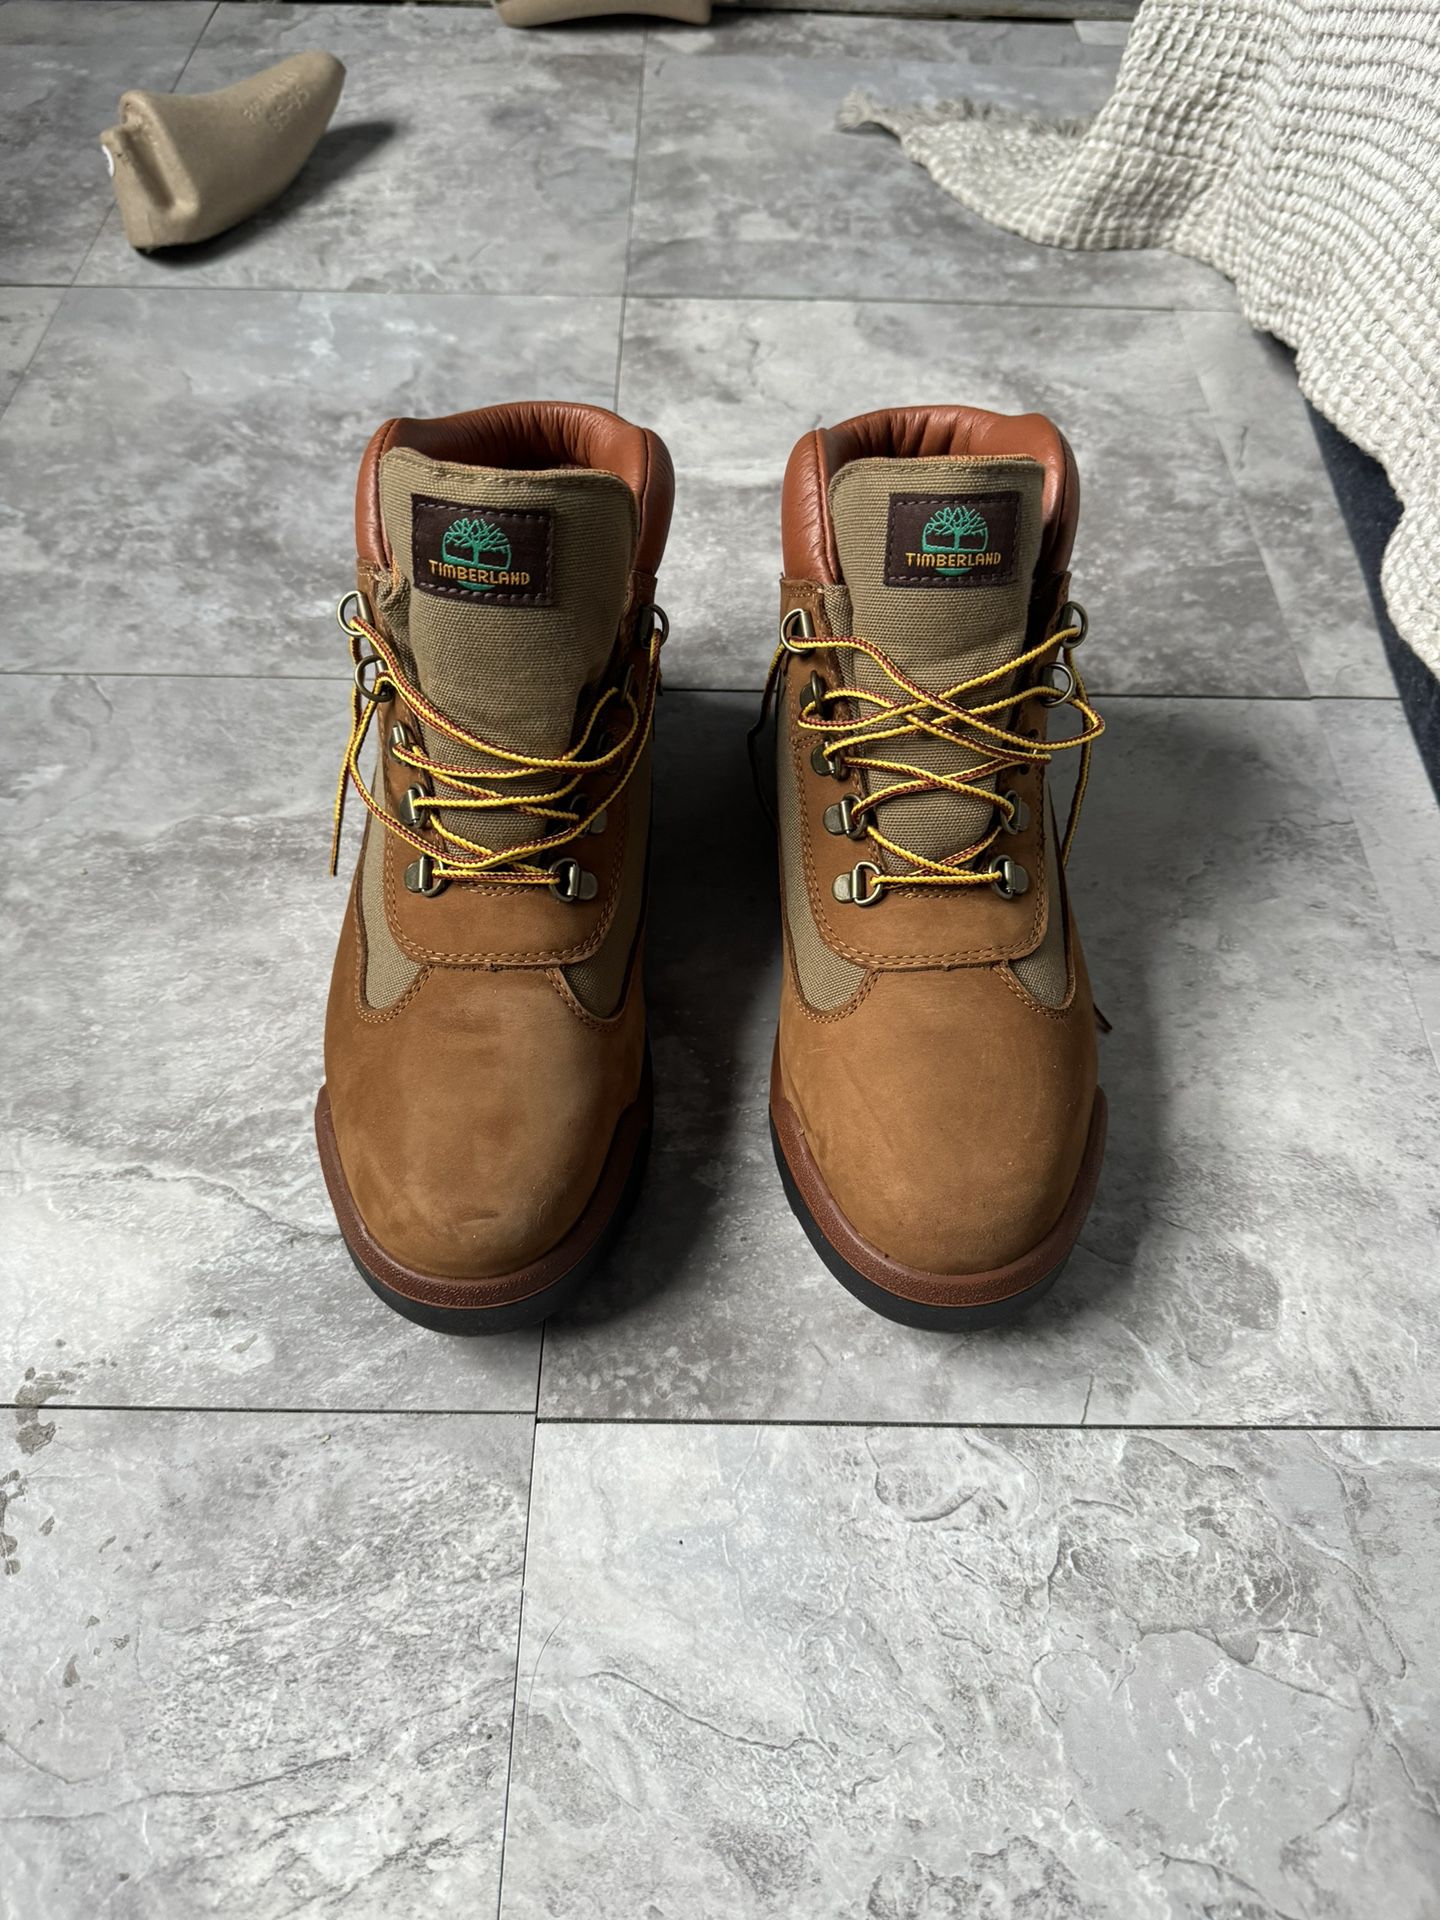 Timberland Field Boots Sesame Chickens Size 9.5